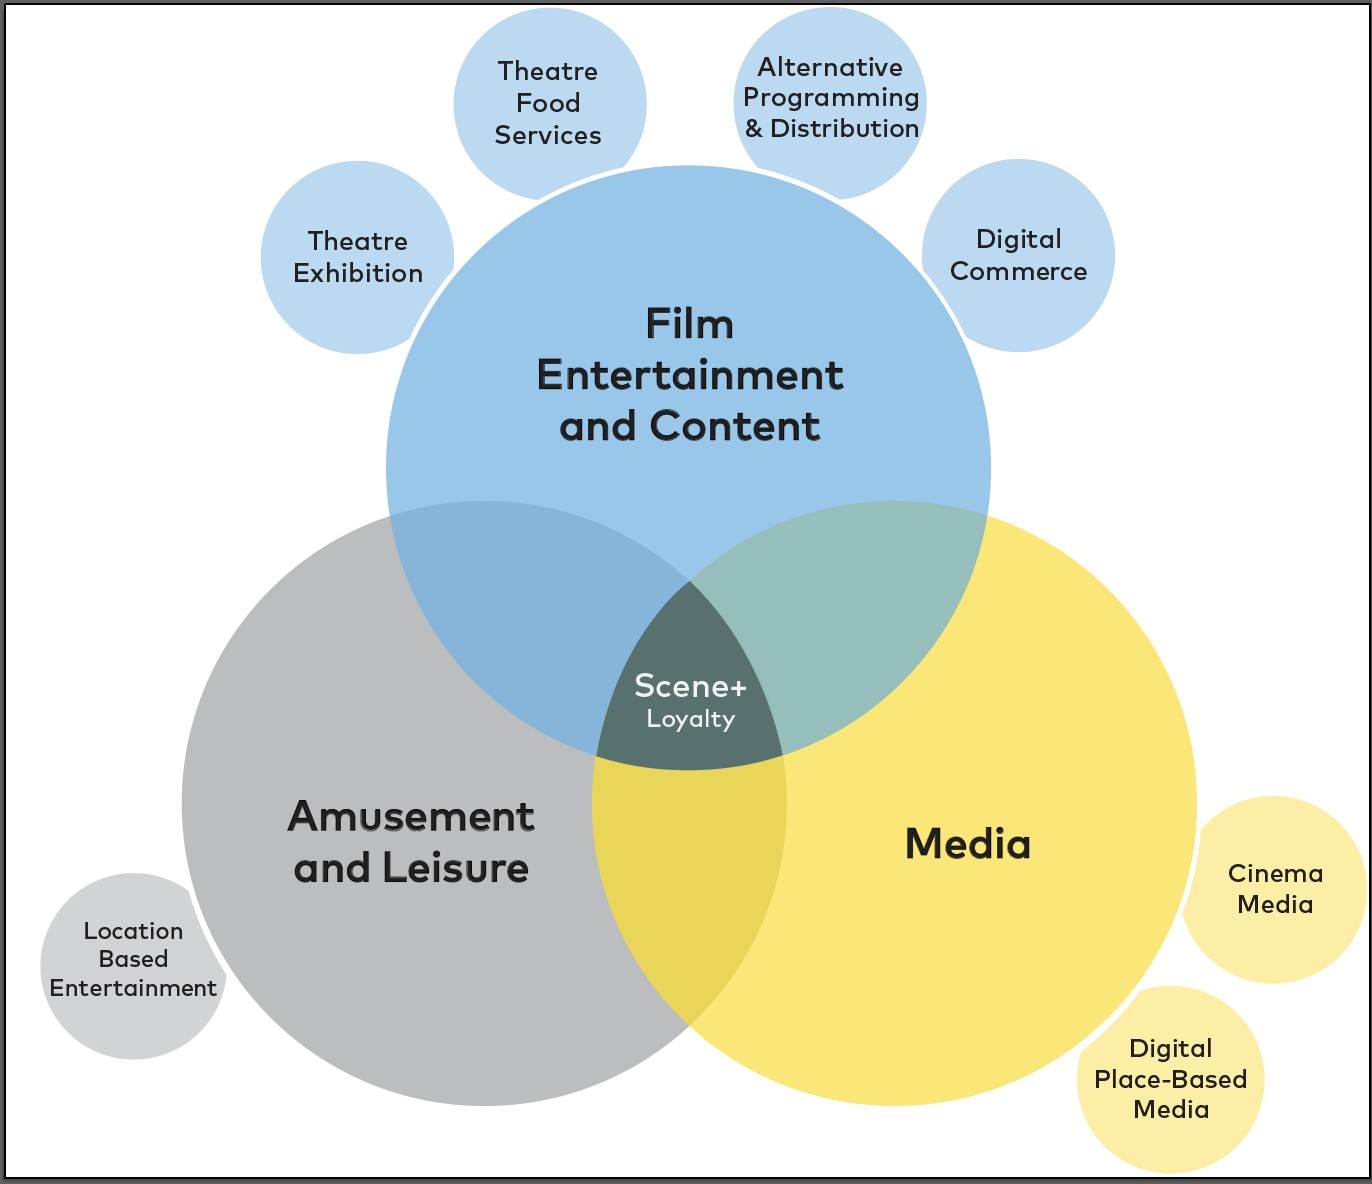 The diagram shows 3 intersecting circles: Film Entertainment & Content, Media, and Amusement & Leisure.